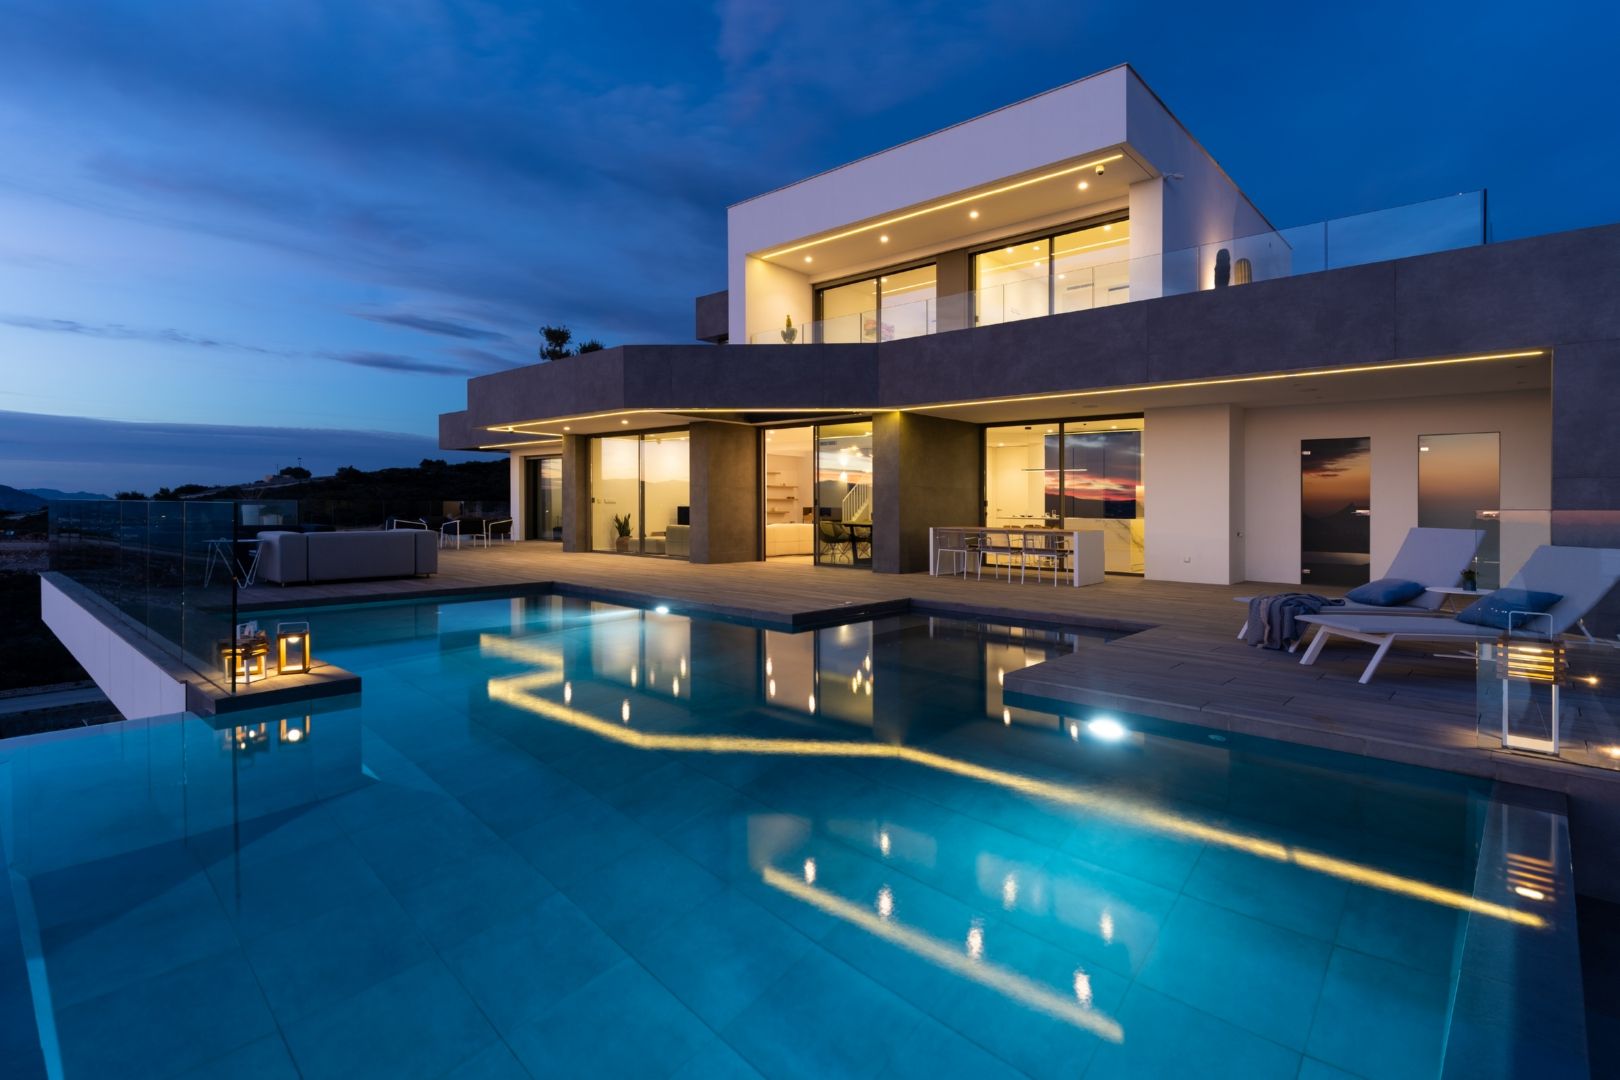 Cumbre del Sol: Luxurious and modern new build villa with breathtaking views